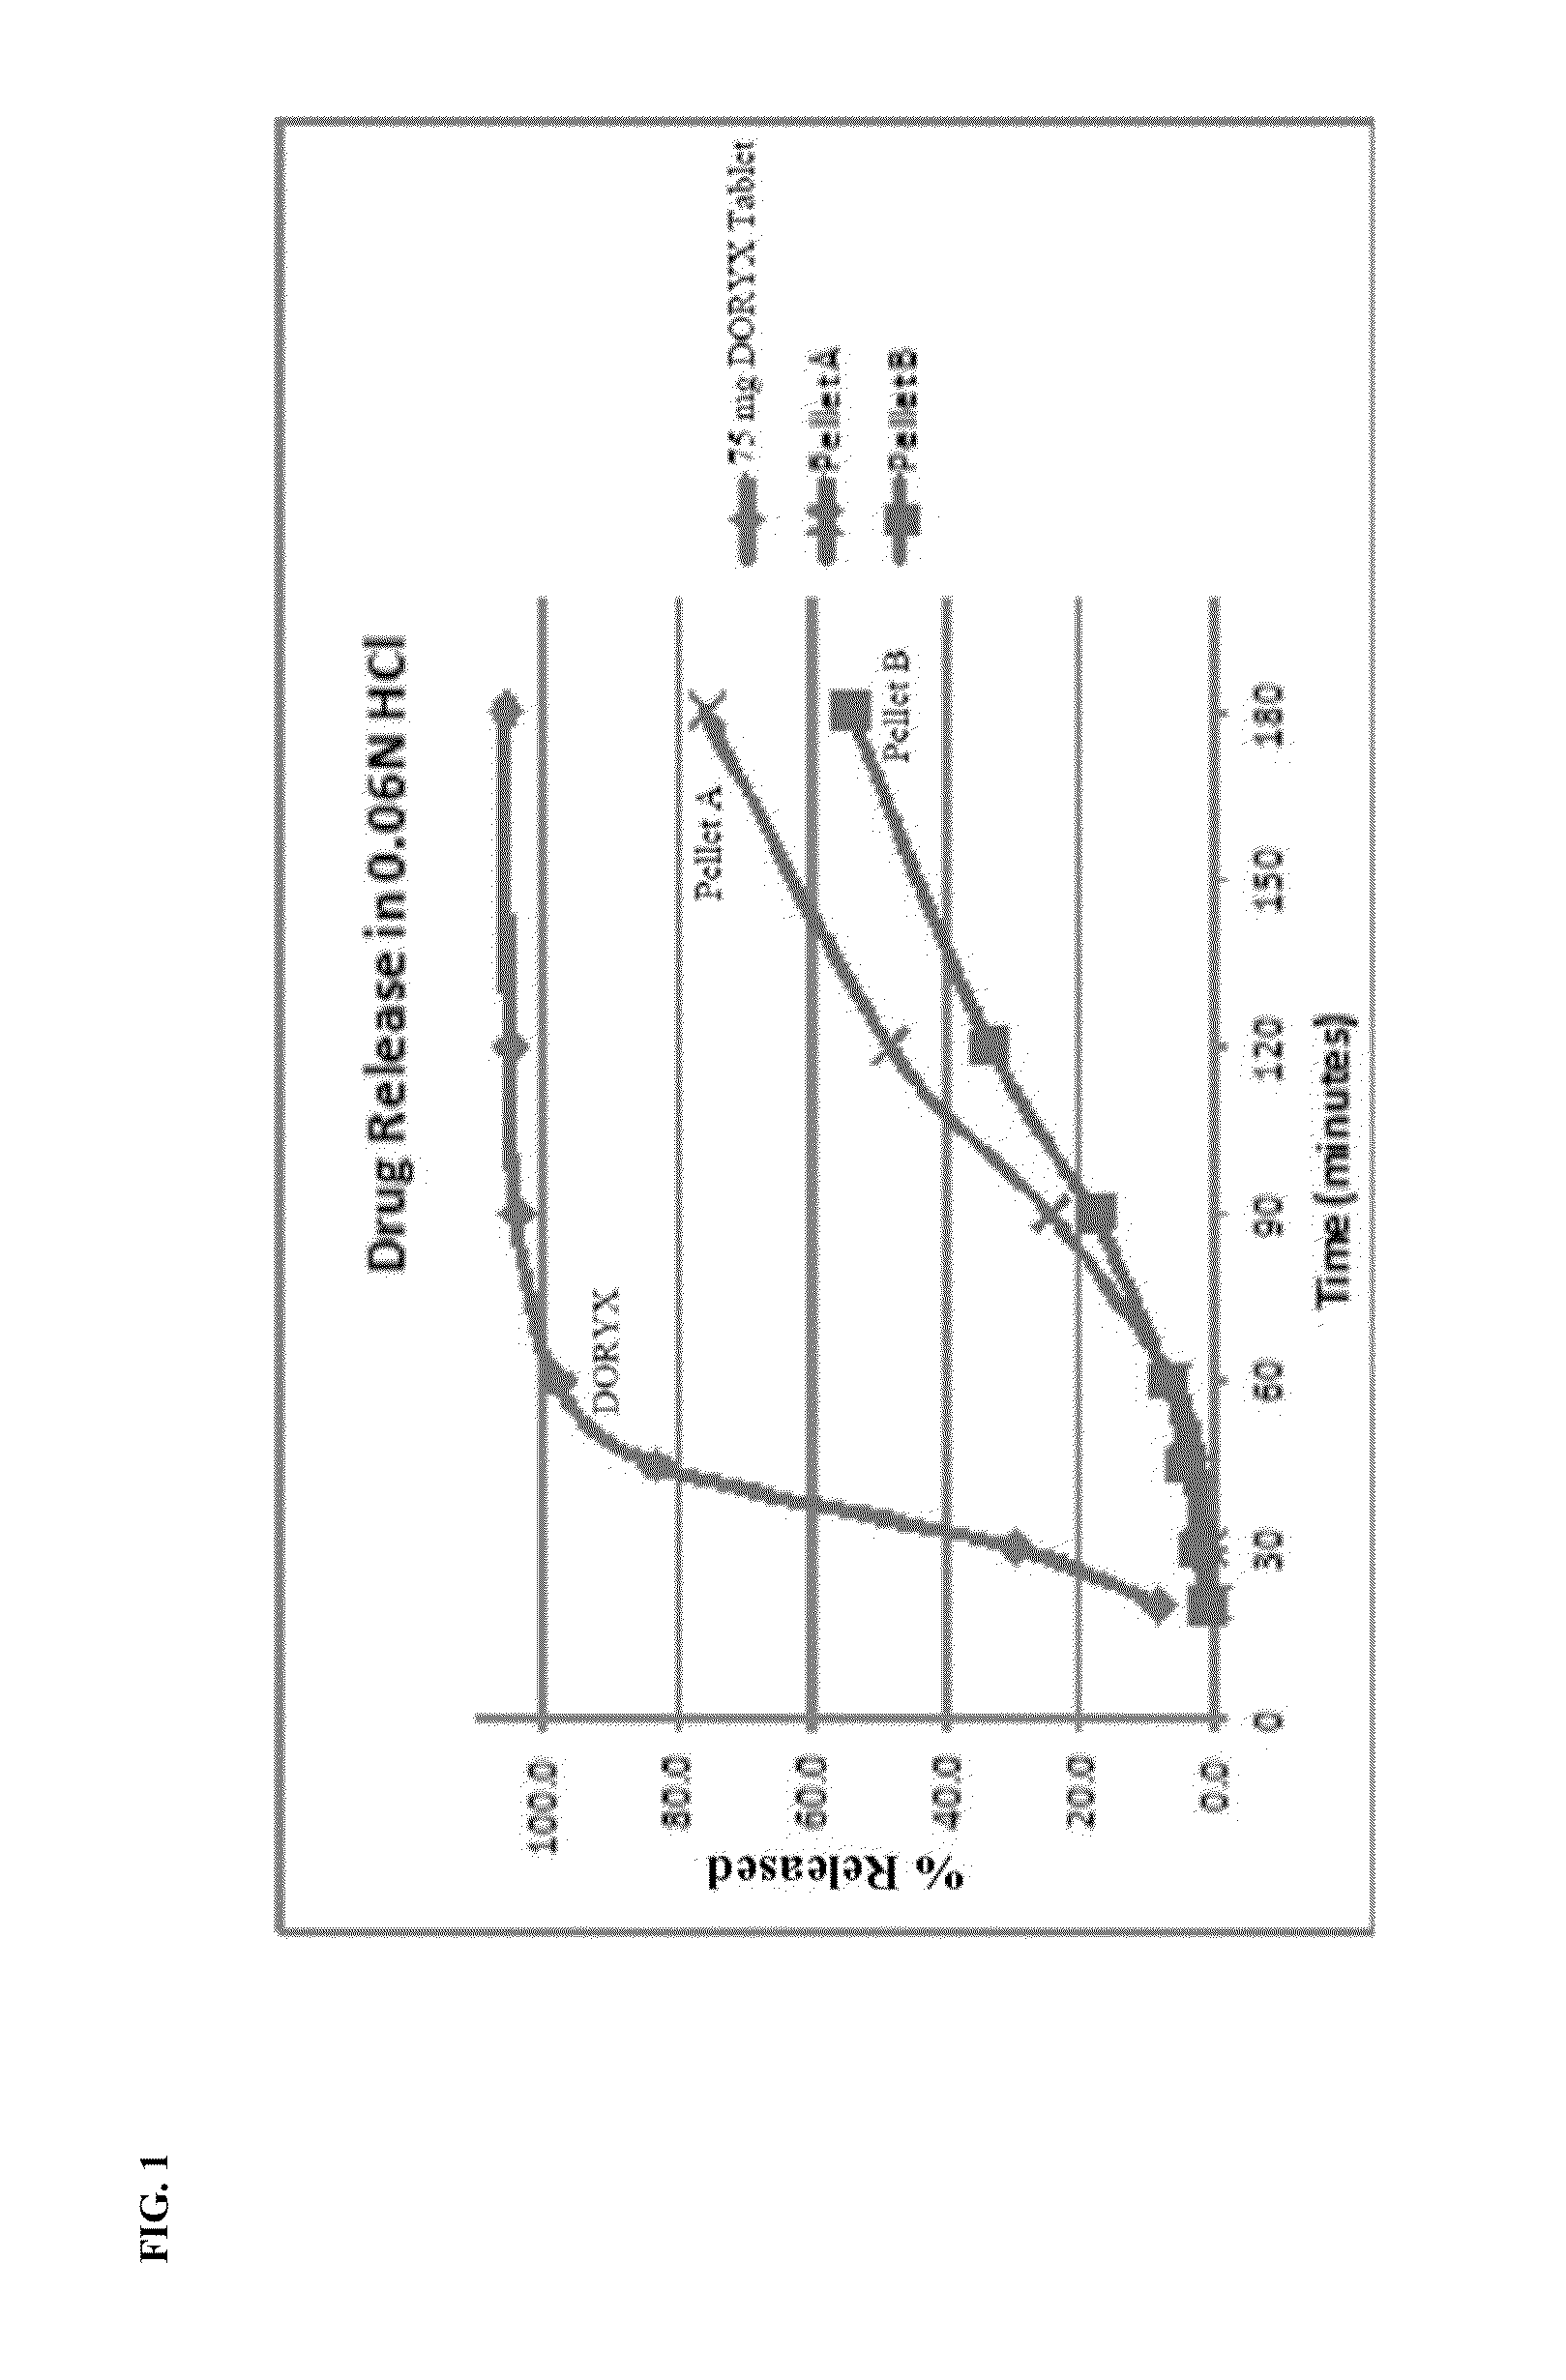 Controlled release doxycycline